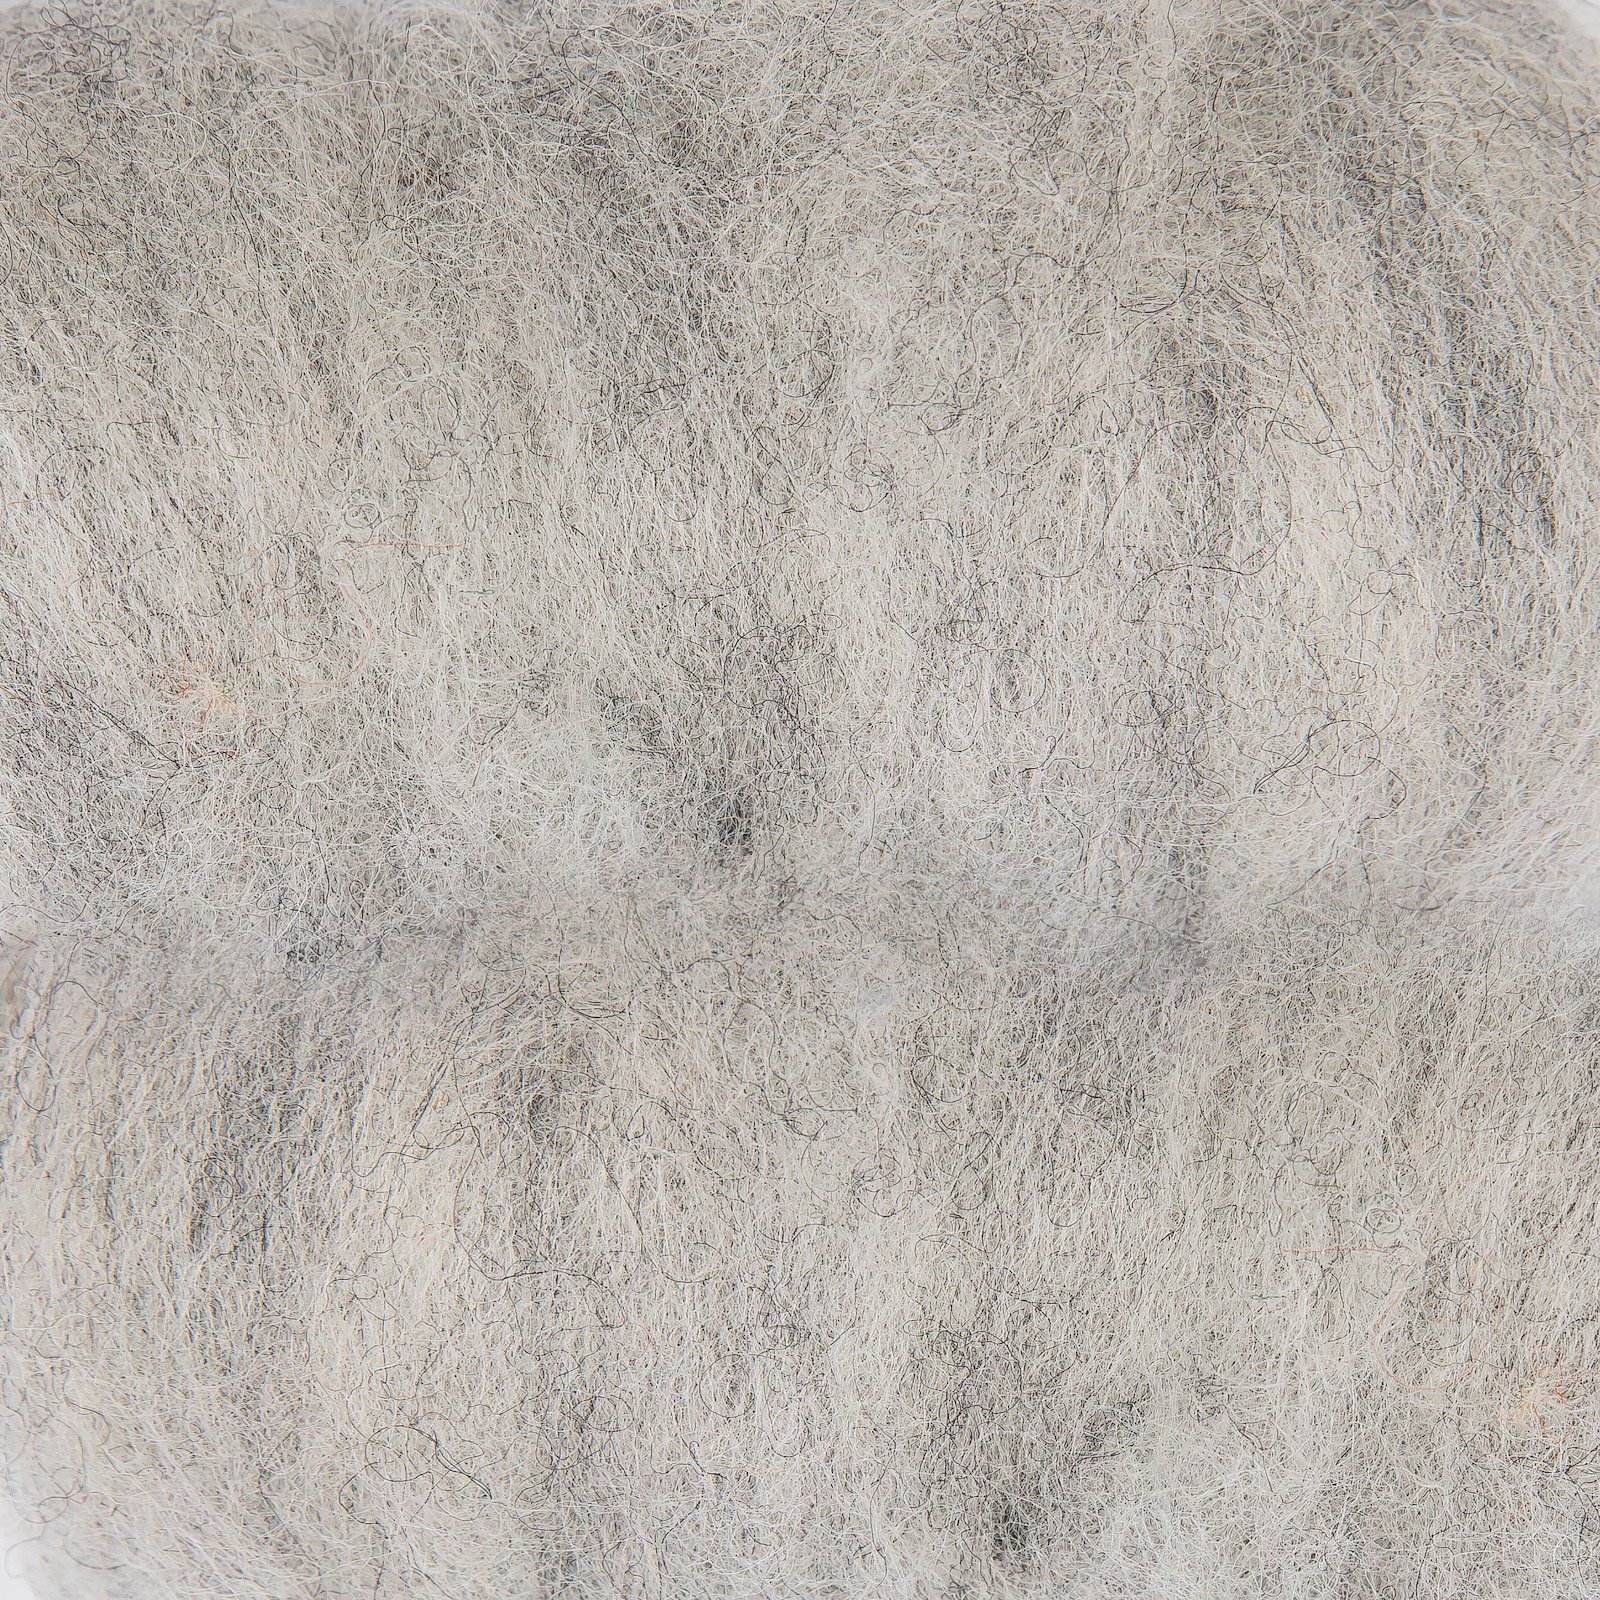 Carded wool grey 50g 90048042_pack